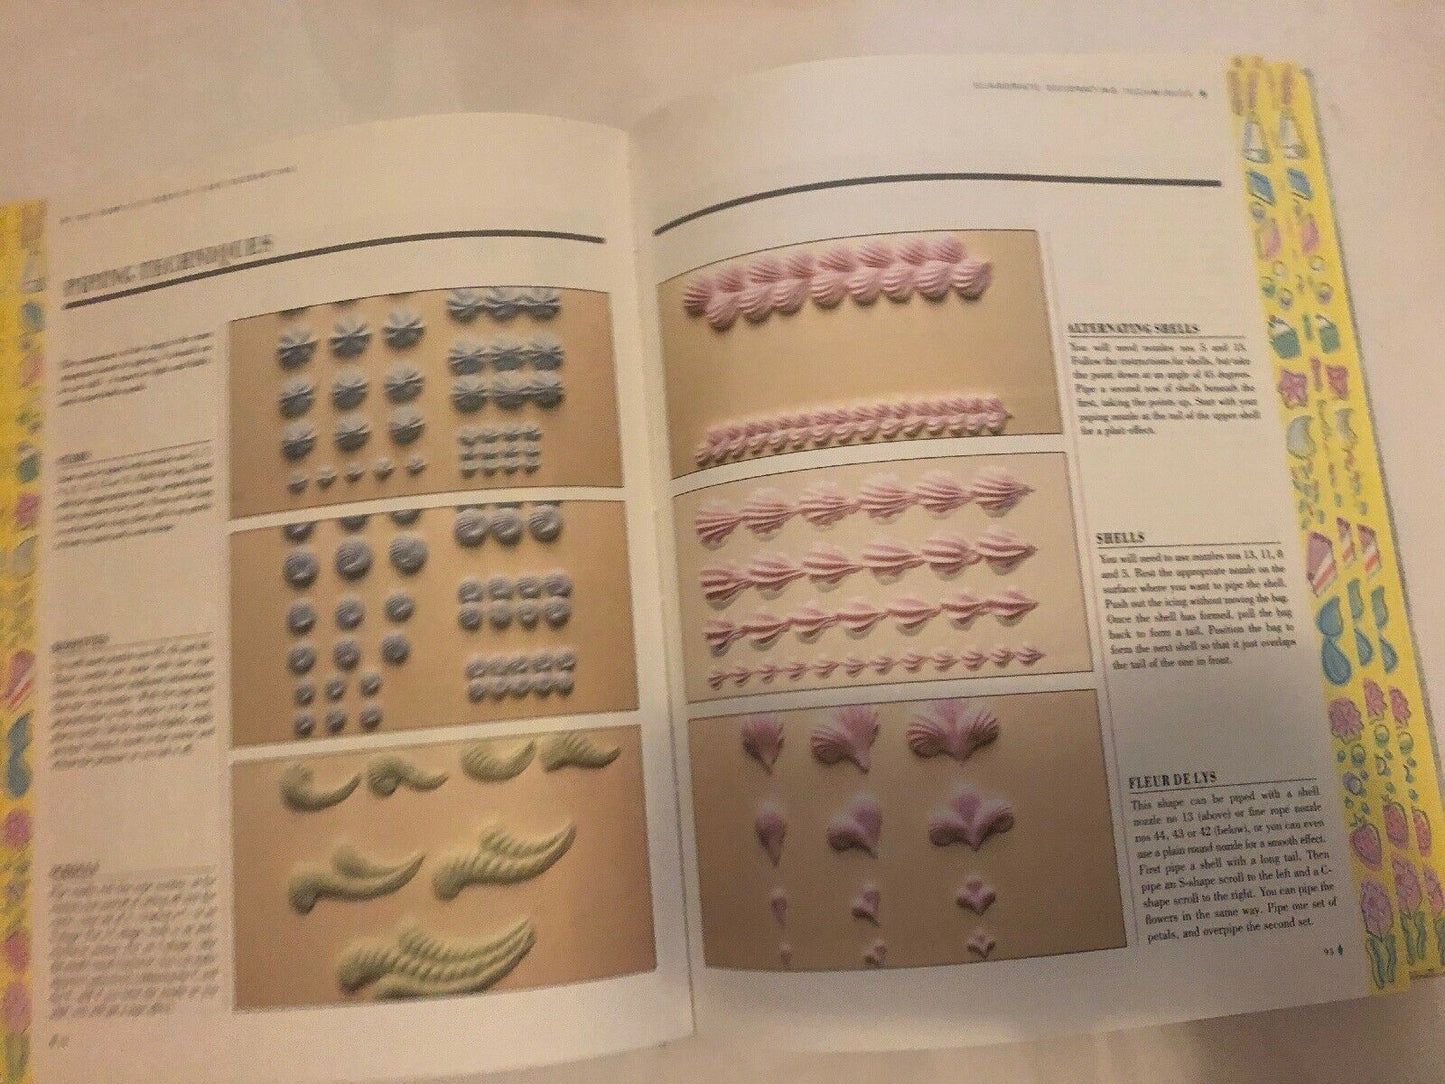 The Complete Book Of Cake Decorating by Bridget Jones 257 pages Hardcover 1990